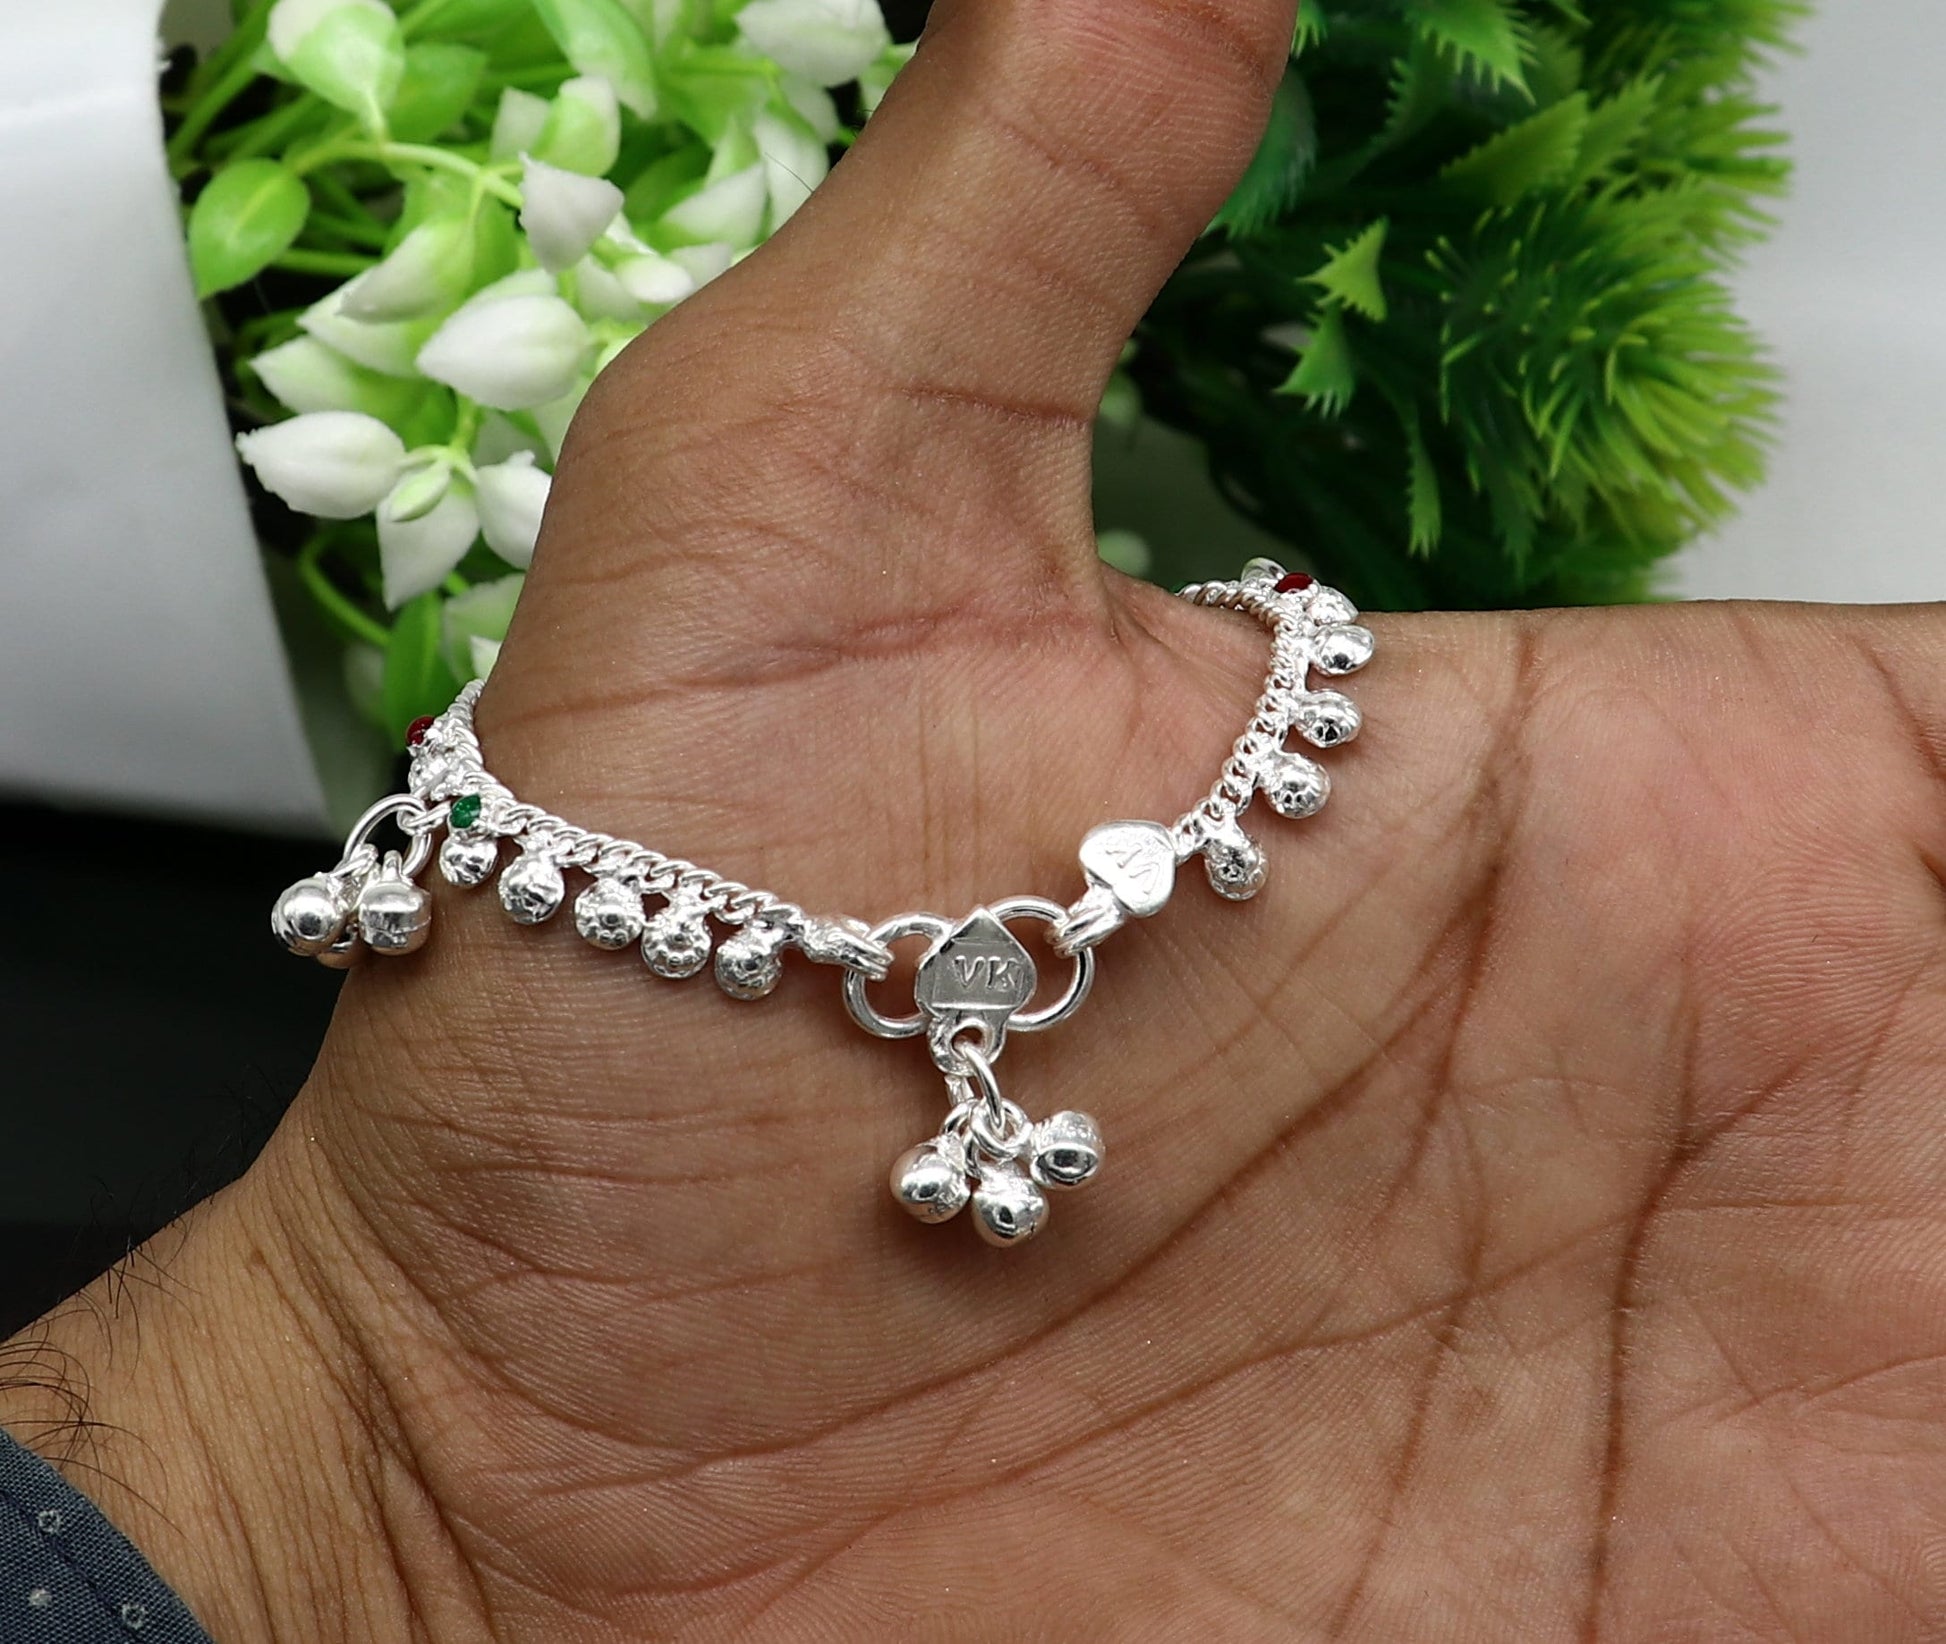 6" inches long handmade solid sterling silver baby kids ankle bracelet elegant dainty customized charm bracelet unisex baby jewelry ank425 - TRIBAL ORNAMENTS